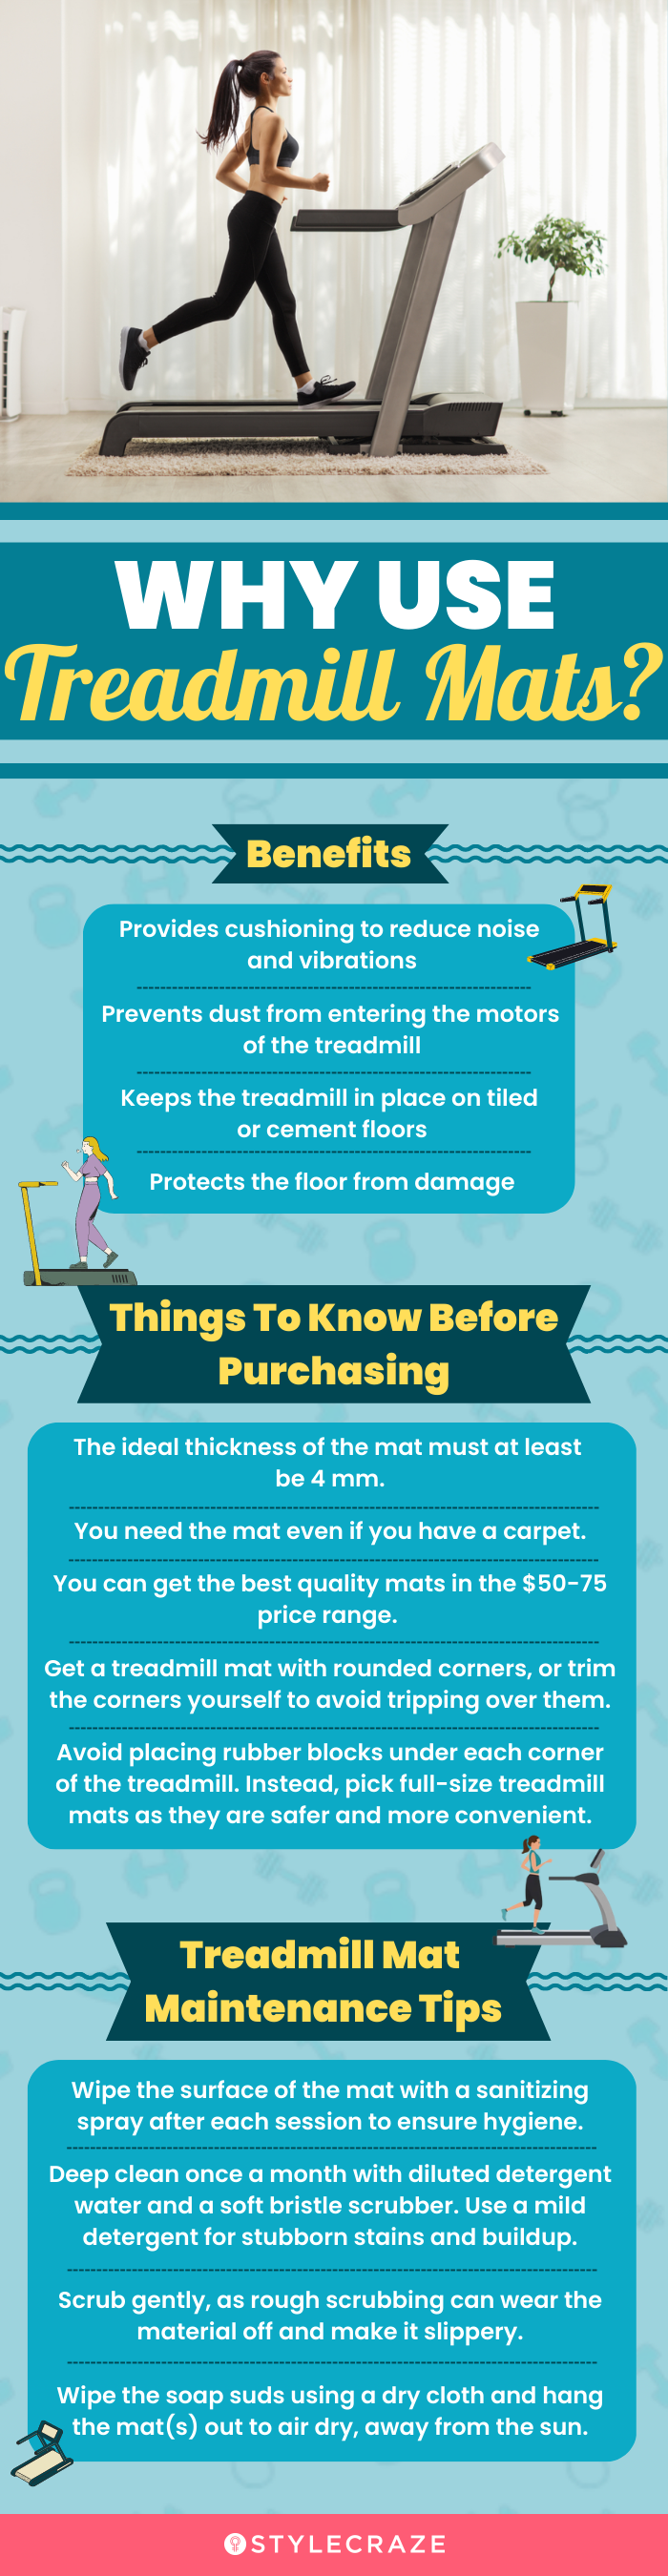 Why Use Treadmill Mats (infographic)